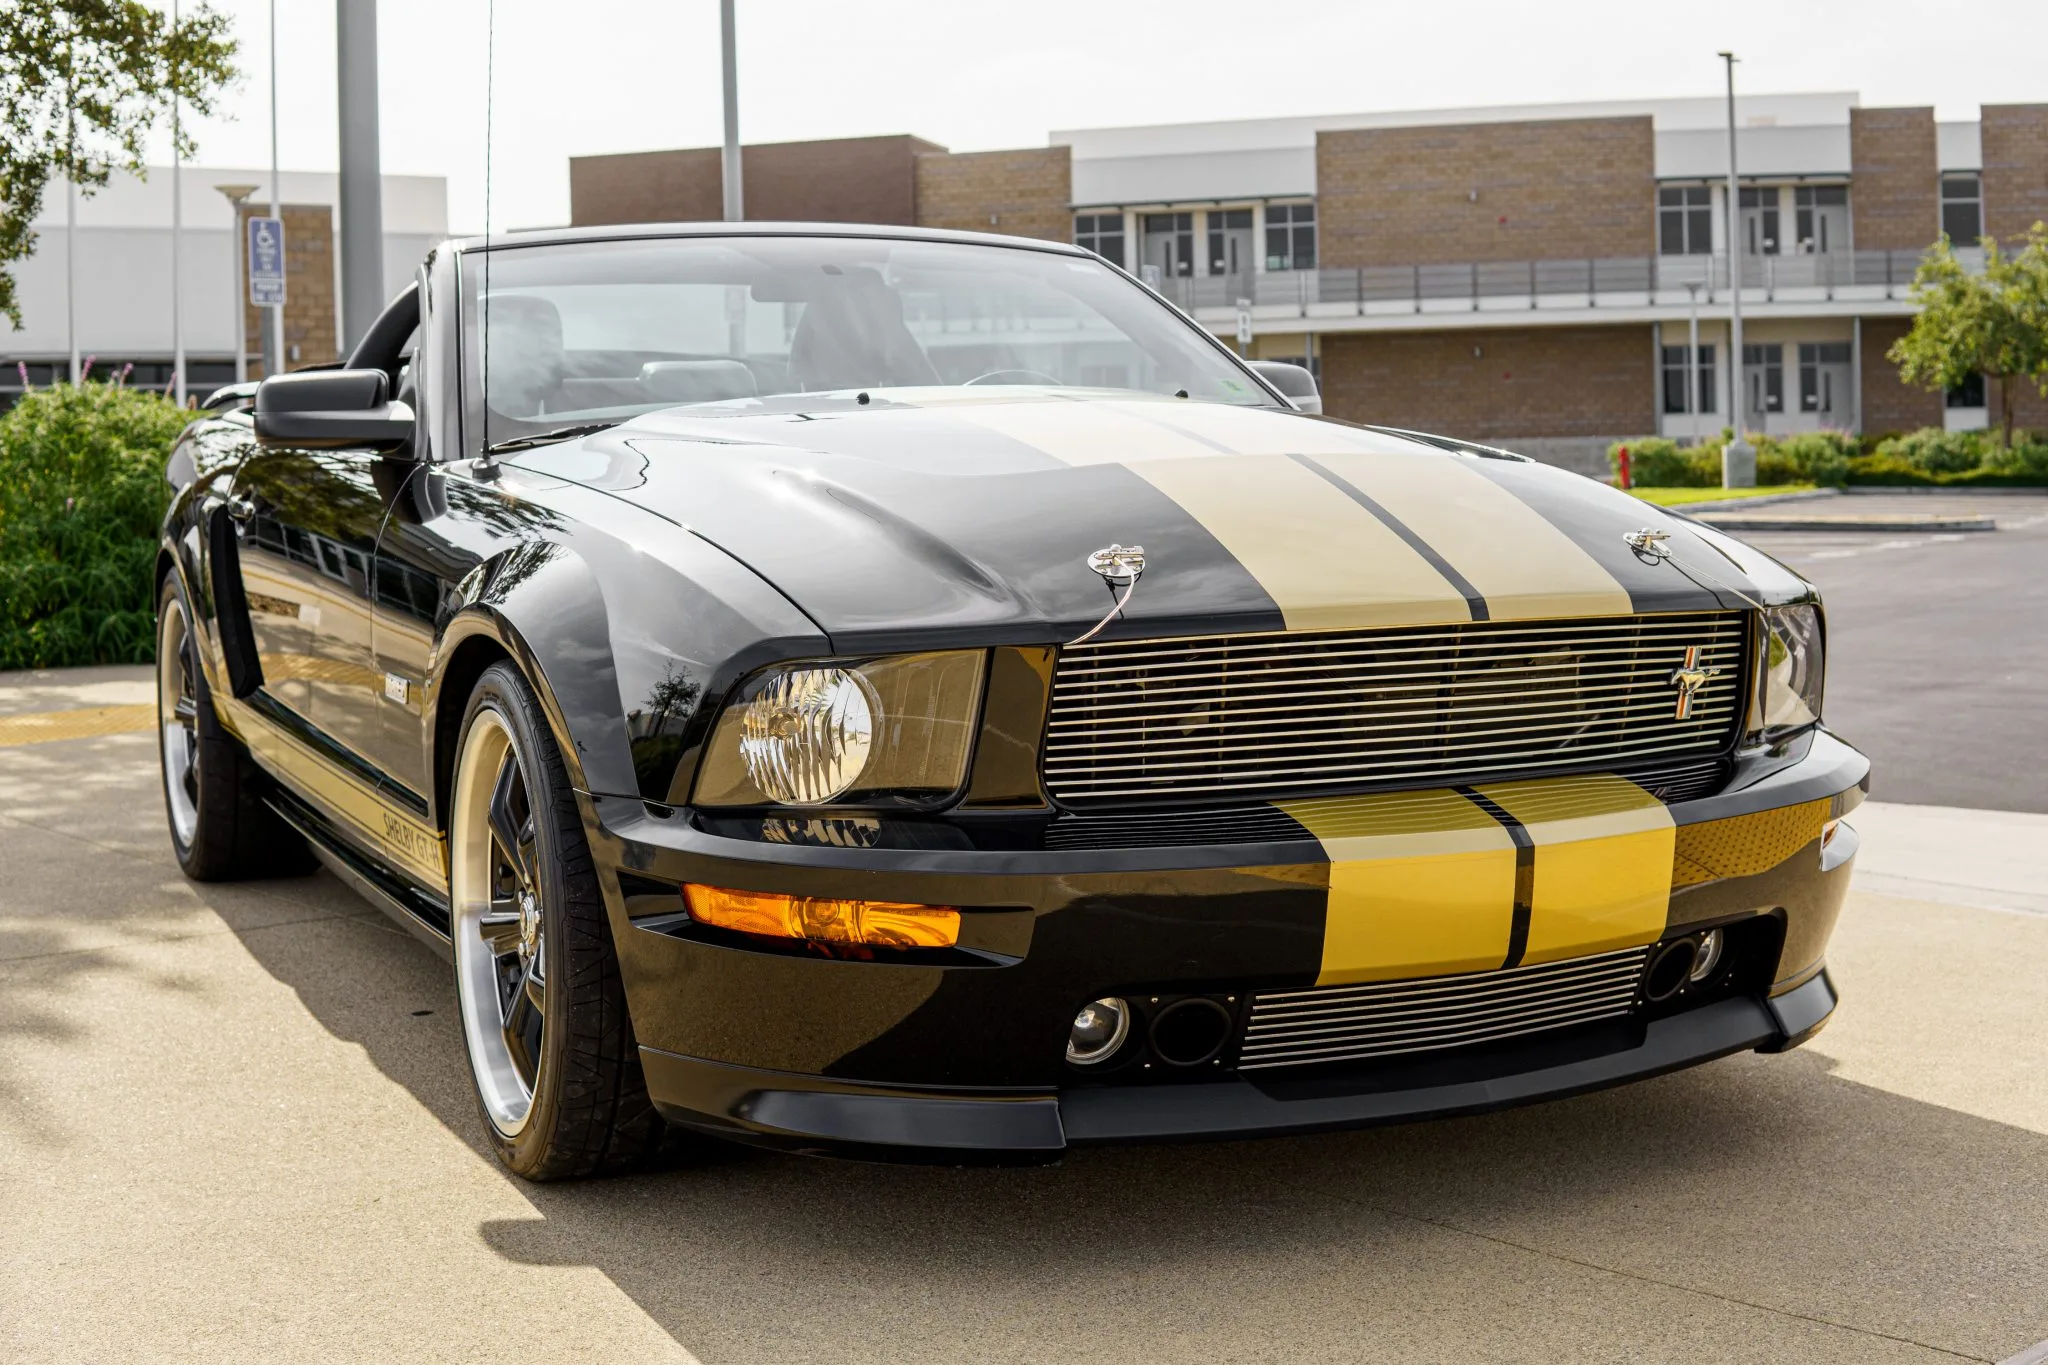 Mustang Of The Day: 2007 Ford Mustang Shelby GT-H